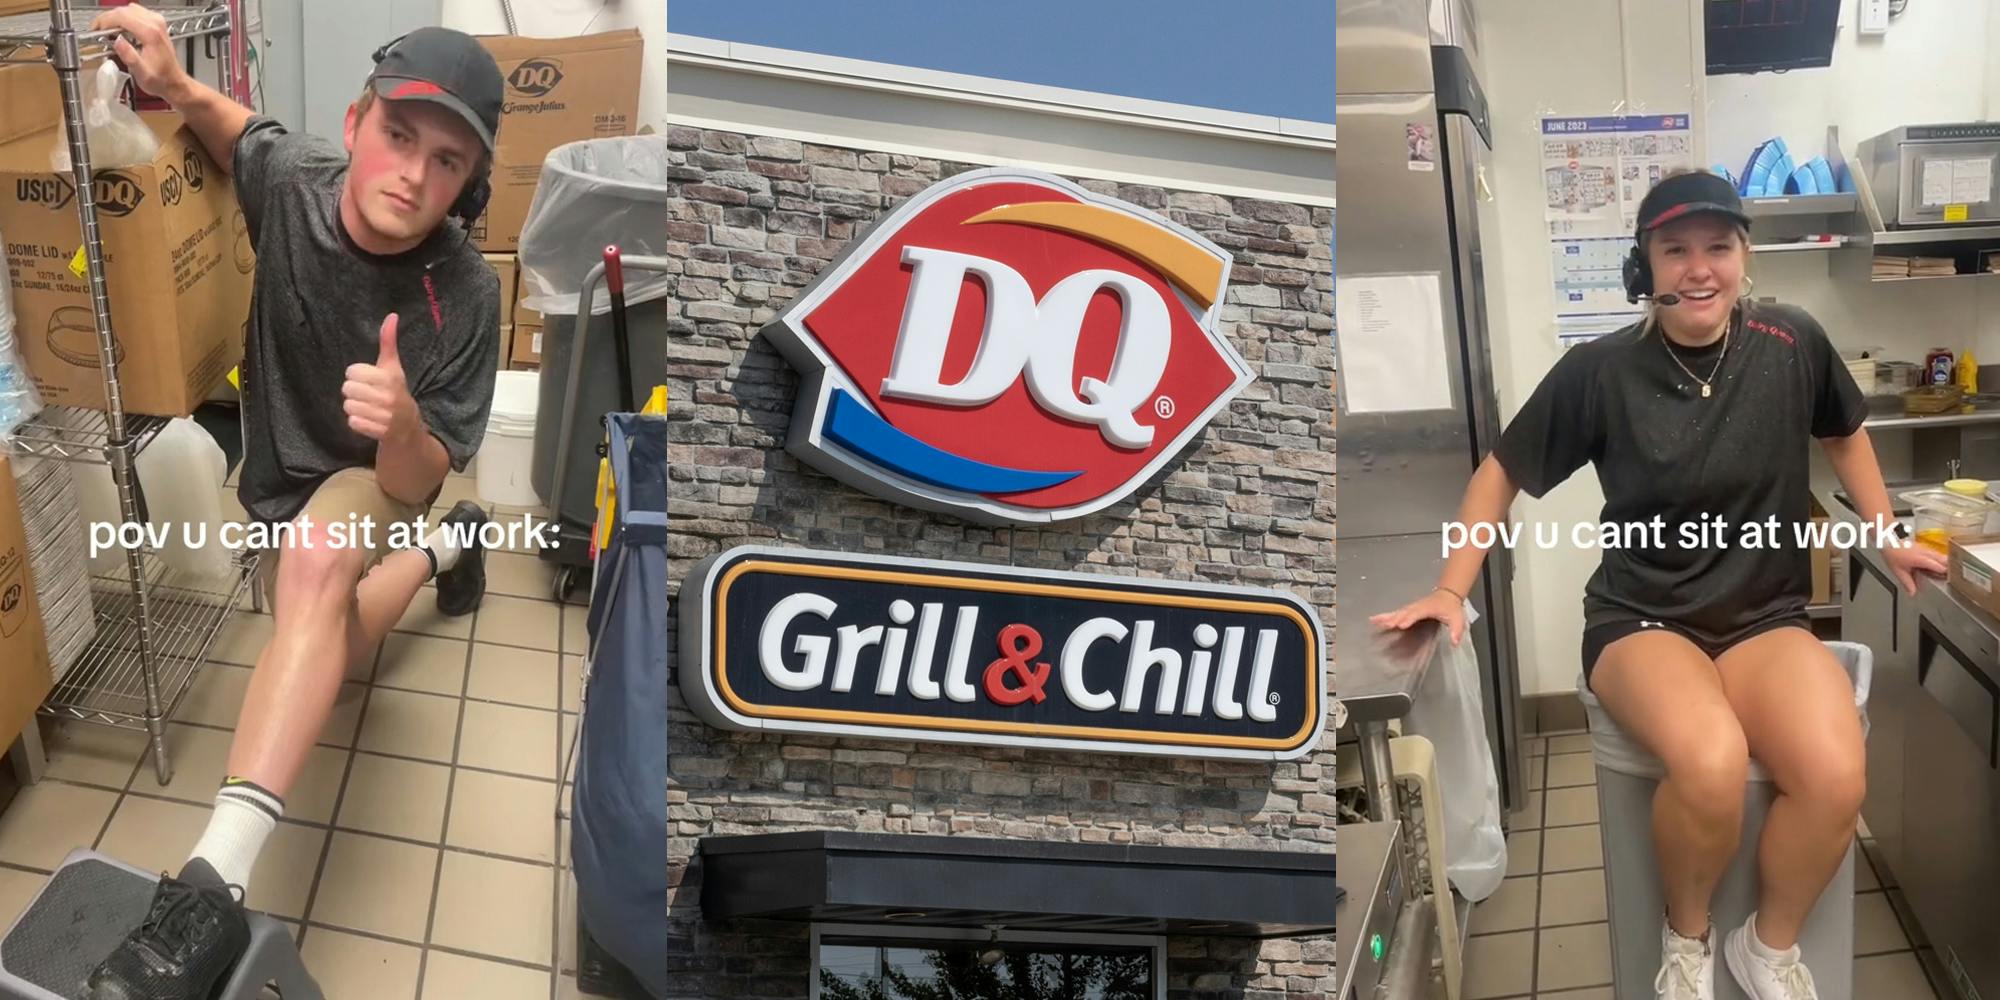 DQ worker sitting without chair with caption "pov u cant sit at work:" (l) Dairy Queen building with sign (c) DQ worker sitting without chair with caption "pov u cant sit at work:" (r)